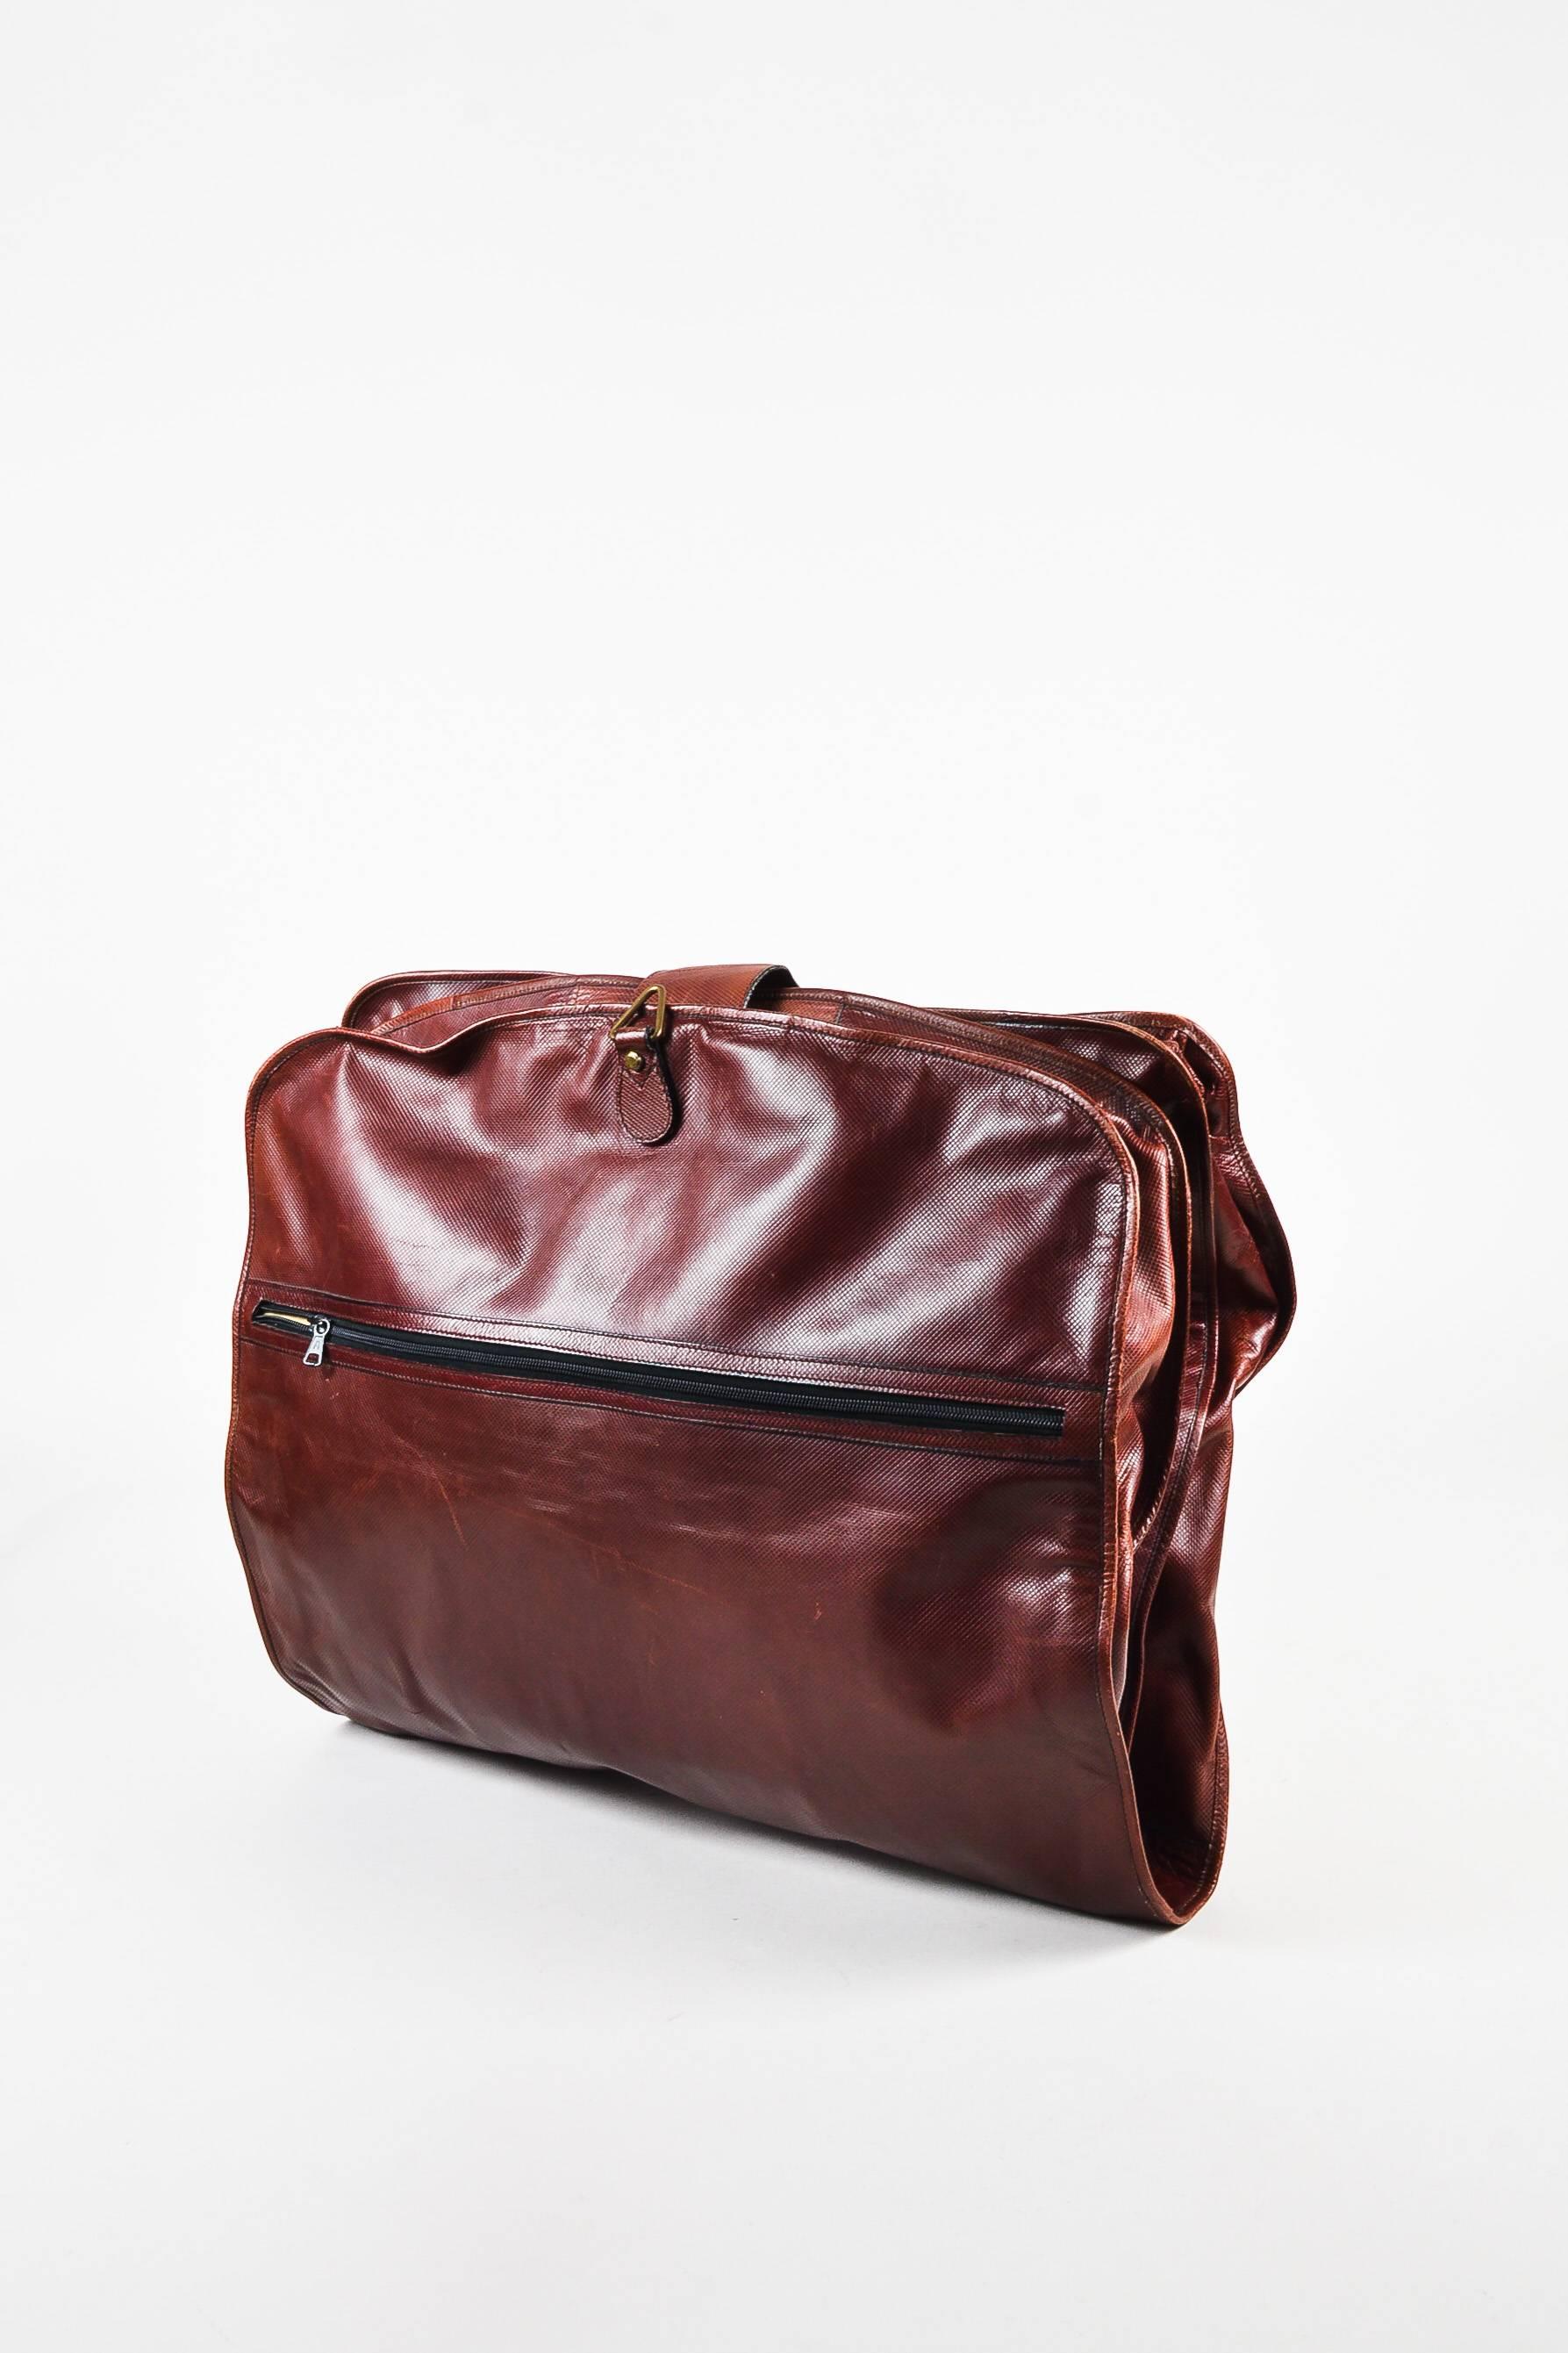 Vintage reddish brown textured leather garment bag from Bottega Veneta features gold-tone hardware details. Bag can be folded shut with snap closures. Wraparound zipper on the front. Push lock closure on the upper front. Comes with lock and keys.